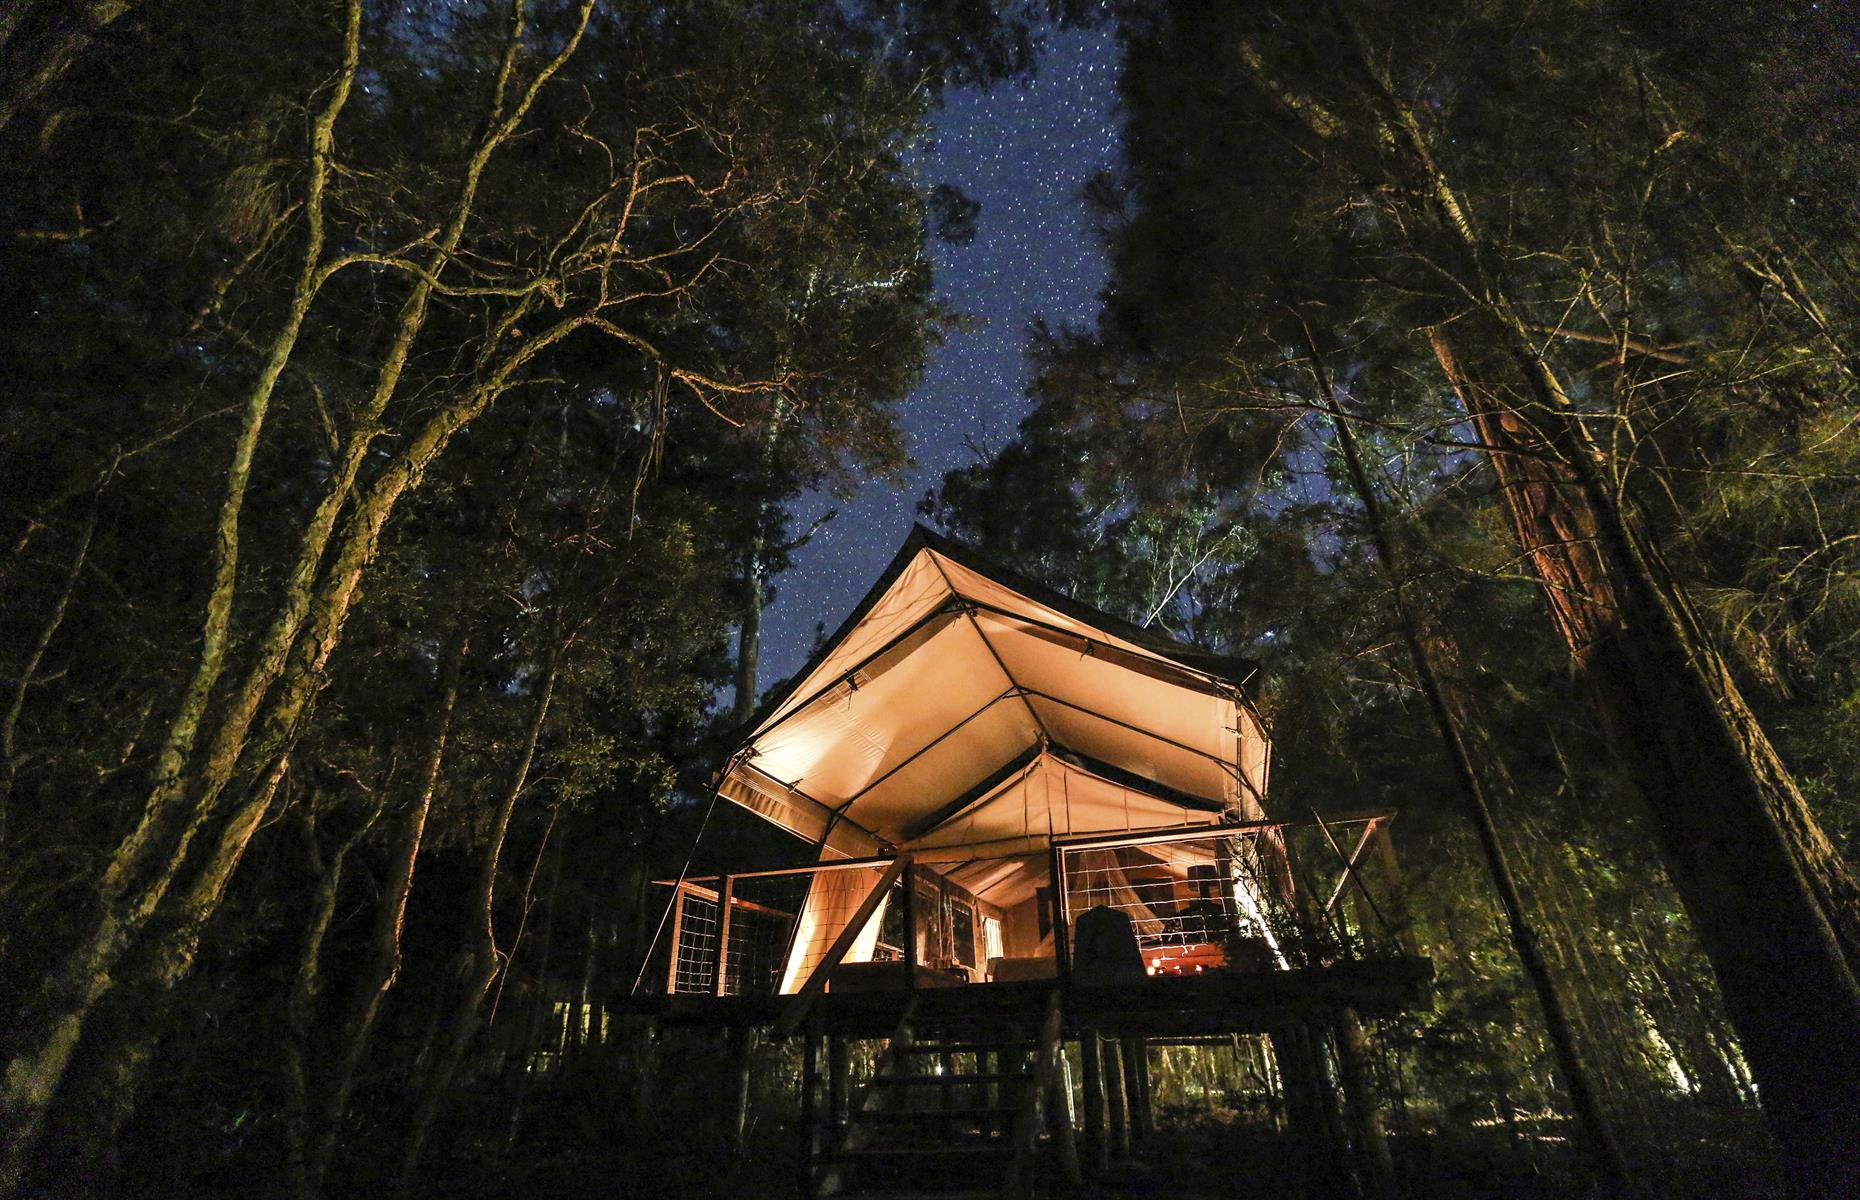 <p>All flickering fairy lights and luxury tents perched among paperbark and eucalyptus trees, <a href="https://paperbarkcamp.com.au/">Paperbark Camp</a> is a magical enclave near the beaches of Jervis Bay. When it opened in 1999, the owners were glamping pioneers and continue to set the standard for Australia's burgeoning posh bush camp scene. The 13 solar-powered safari-style tents have outdoor decks and some have free-standing baths or outdoor showers for wallowing with views. Candlelit meals of delicious regional and Indigenous produce at the Gunyah (meaning meeting place) are a highlight.</p>